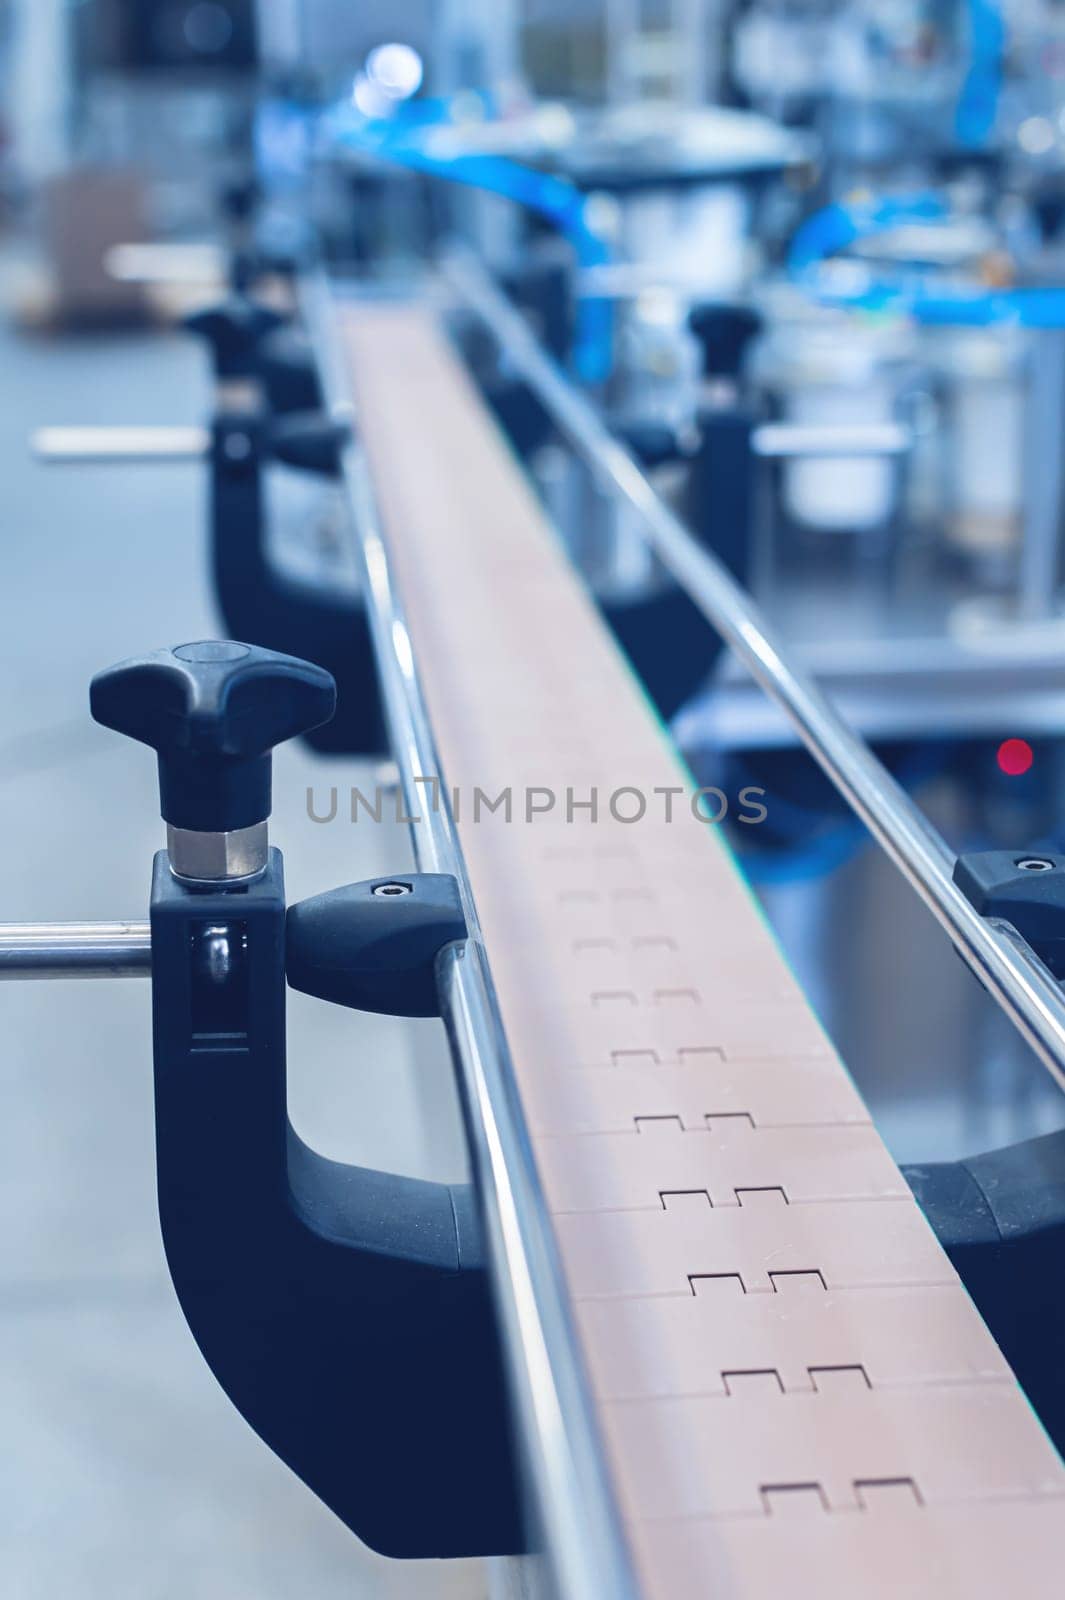 An empty production line conveyor belt at an equipment assembly plant. Toned image. by yanik88